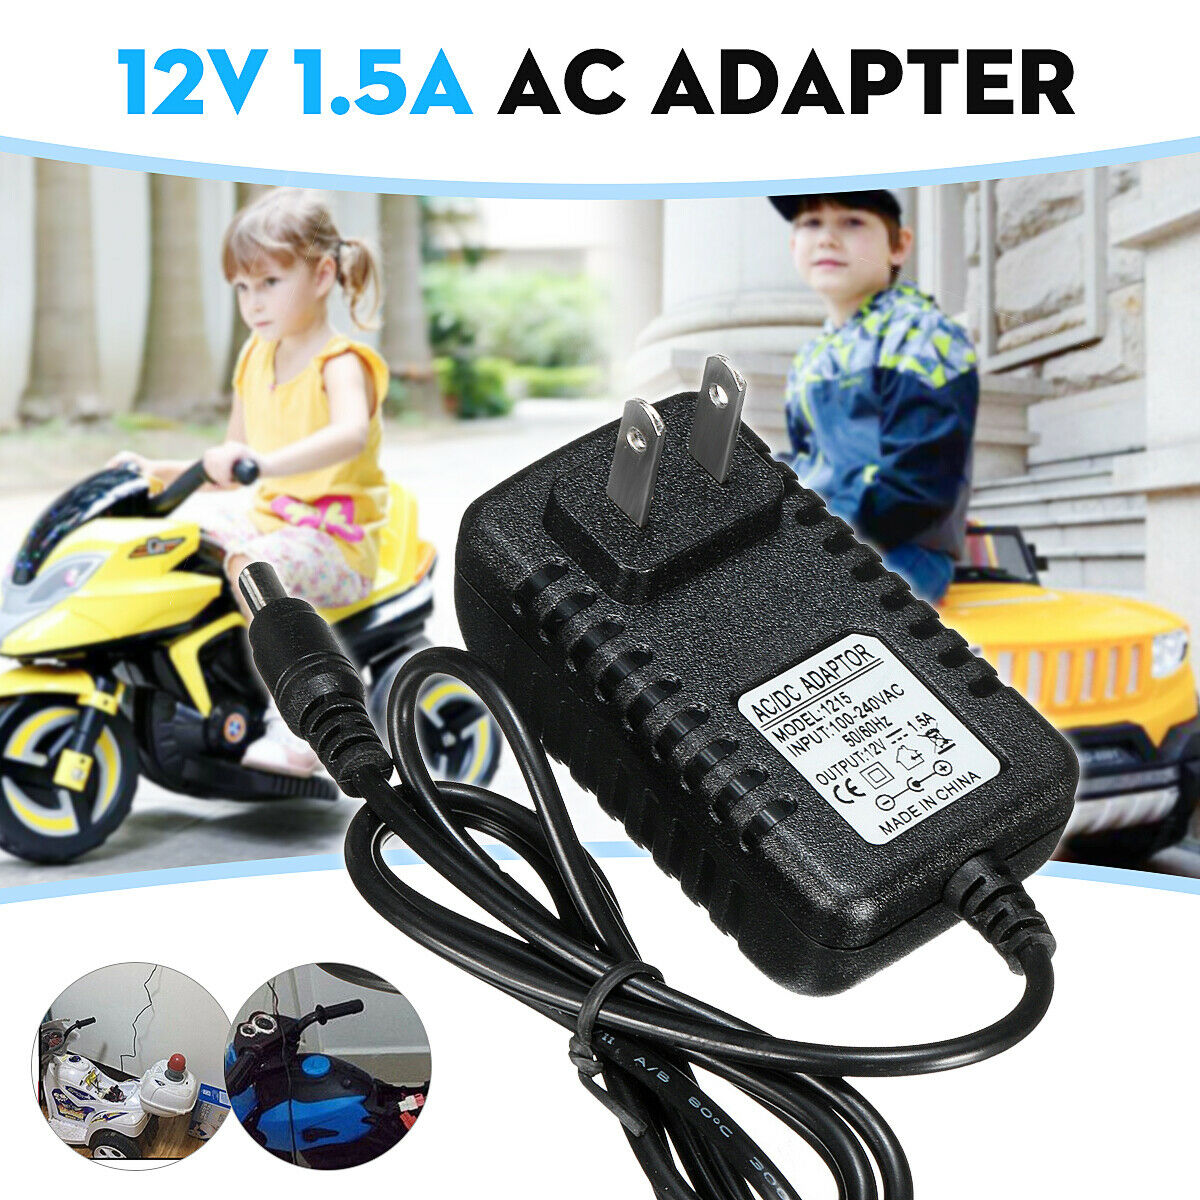 12V 1A Battery Charger Adapter For Kids ATV Quad Ride On Cars Motorcycle Brand: universal MPN: ME49 Contents of the - Click Image to Close